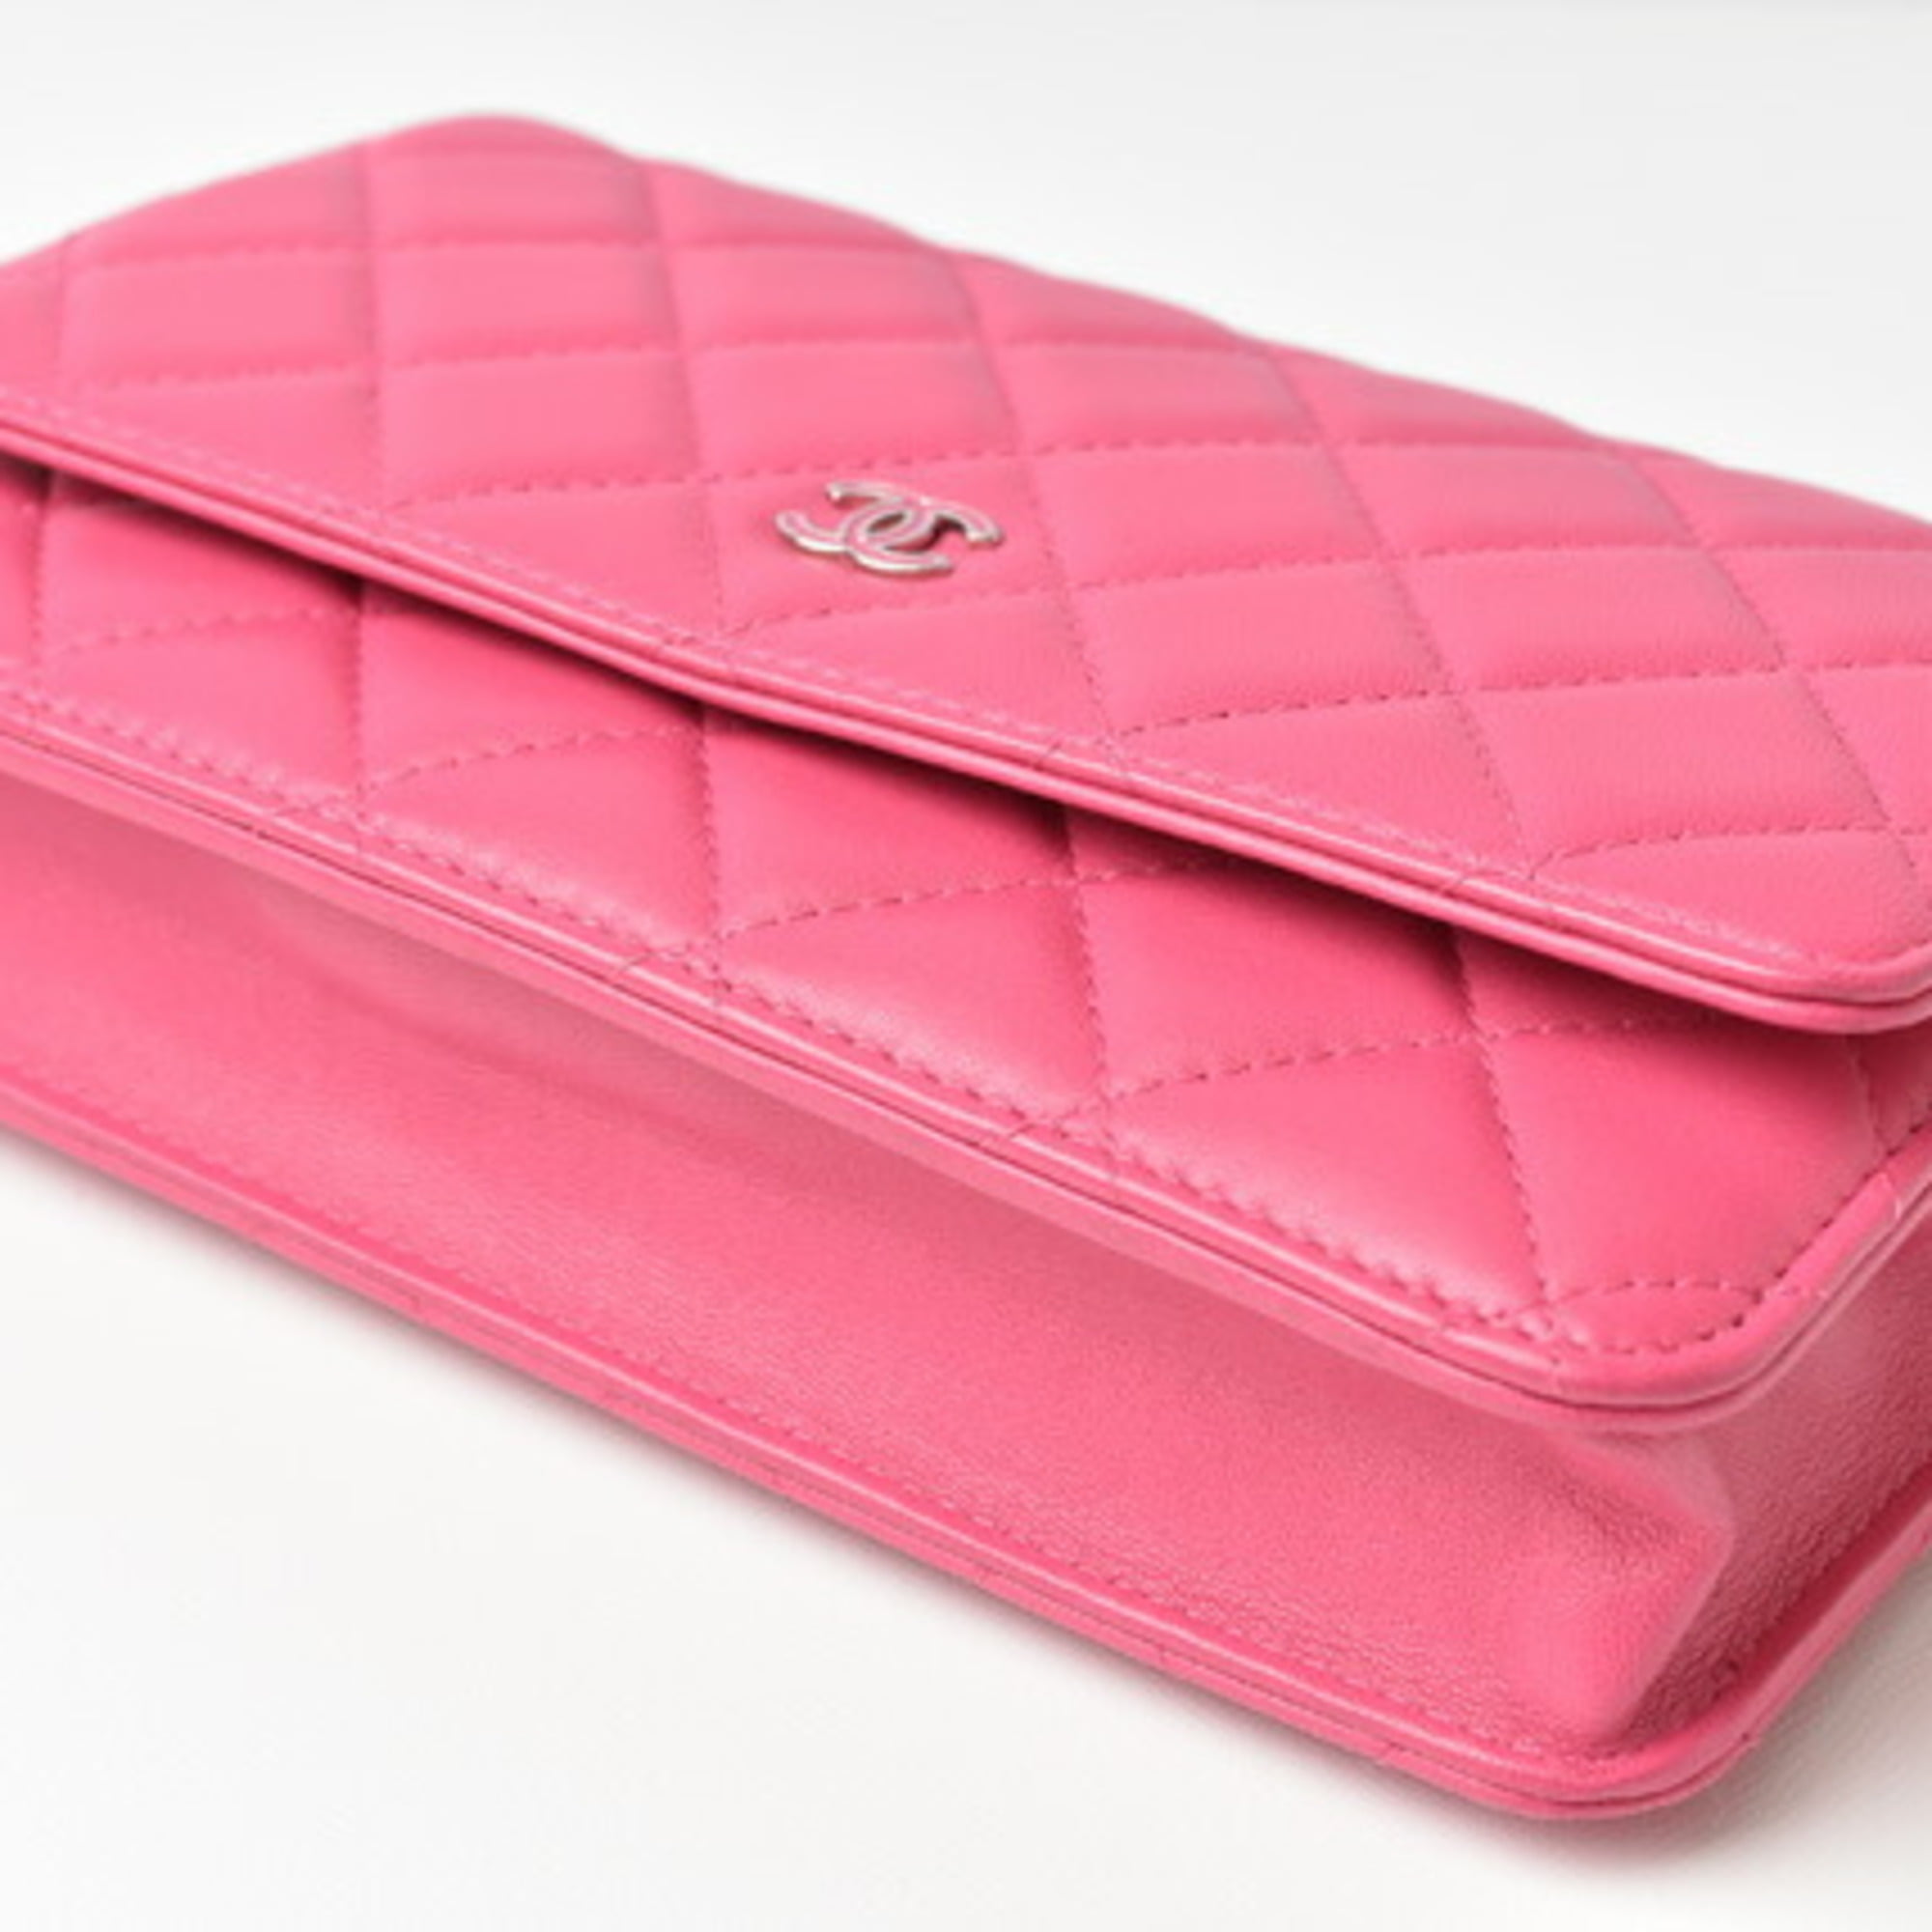 Chanel - Authenticated Clutch Bag - Cloth Pink For Woman, Good condition